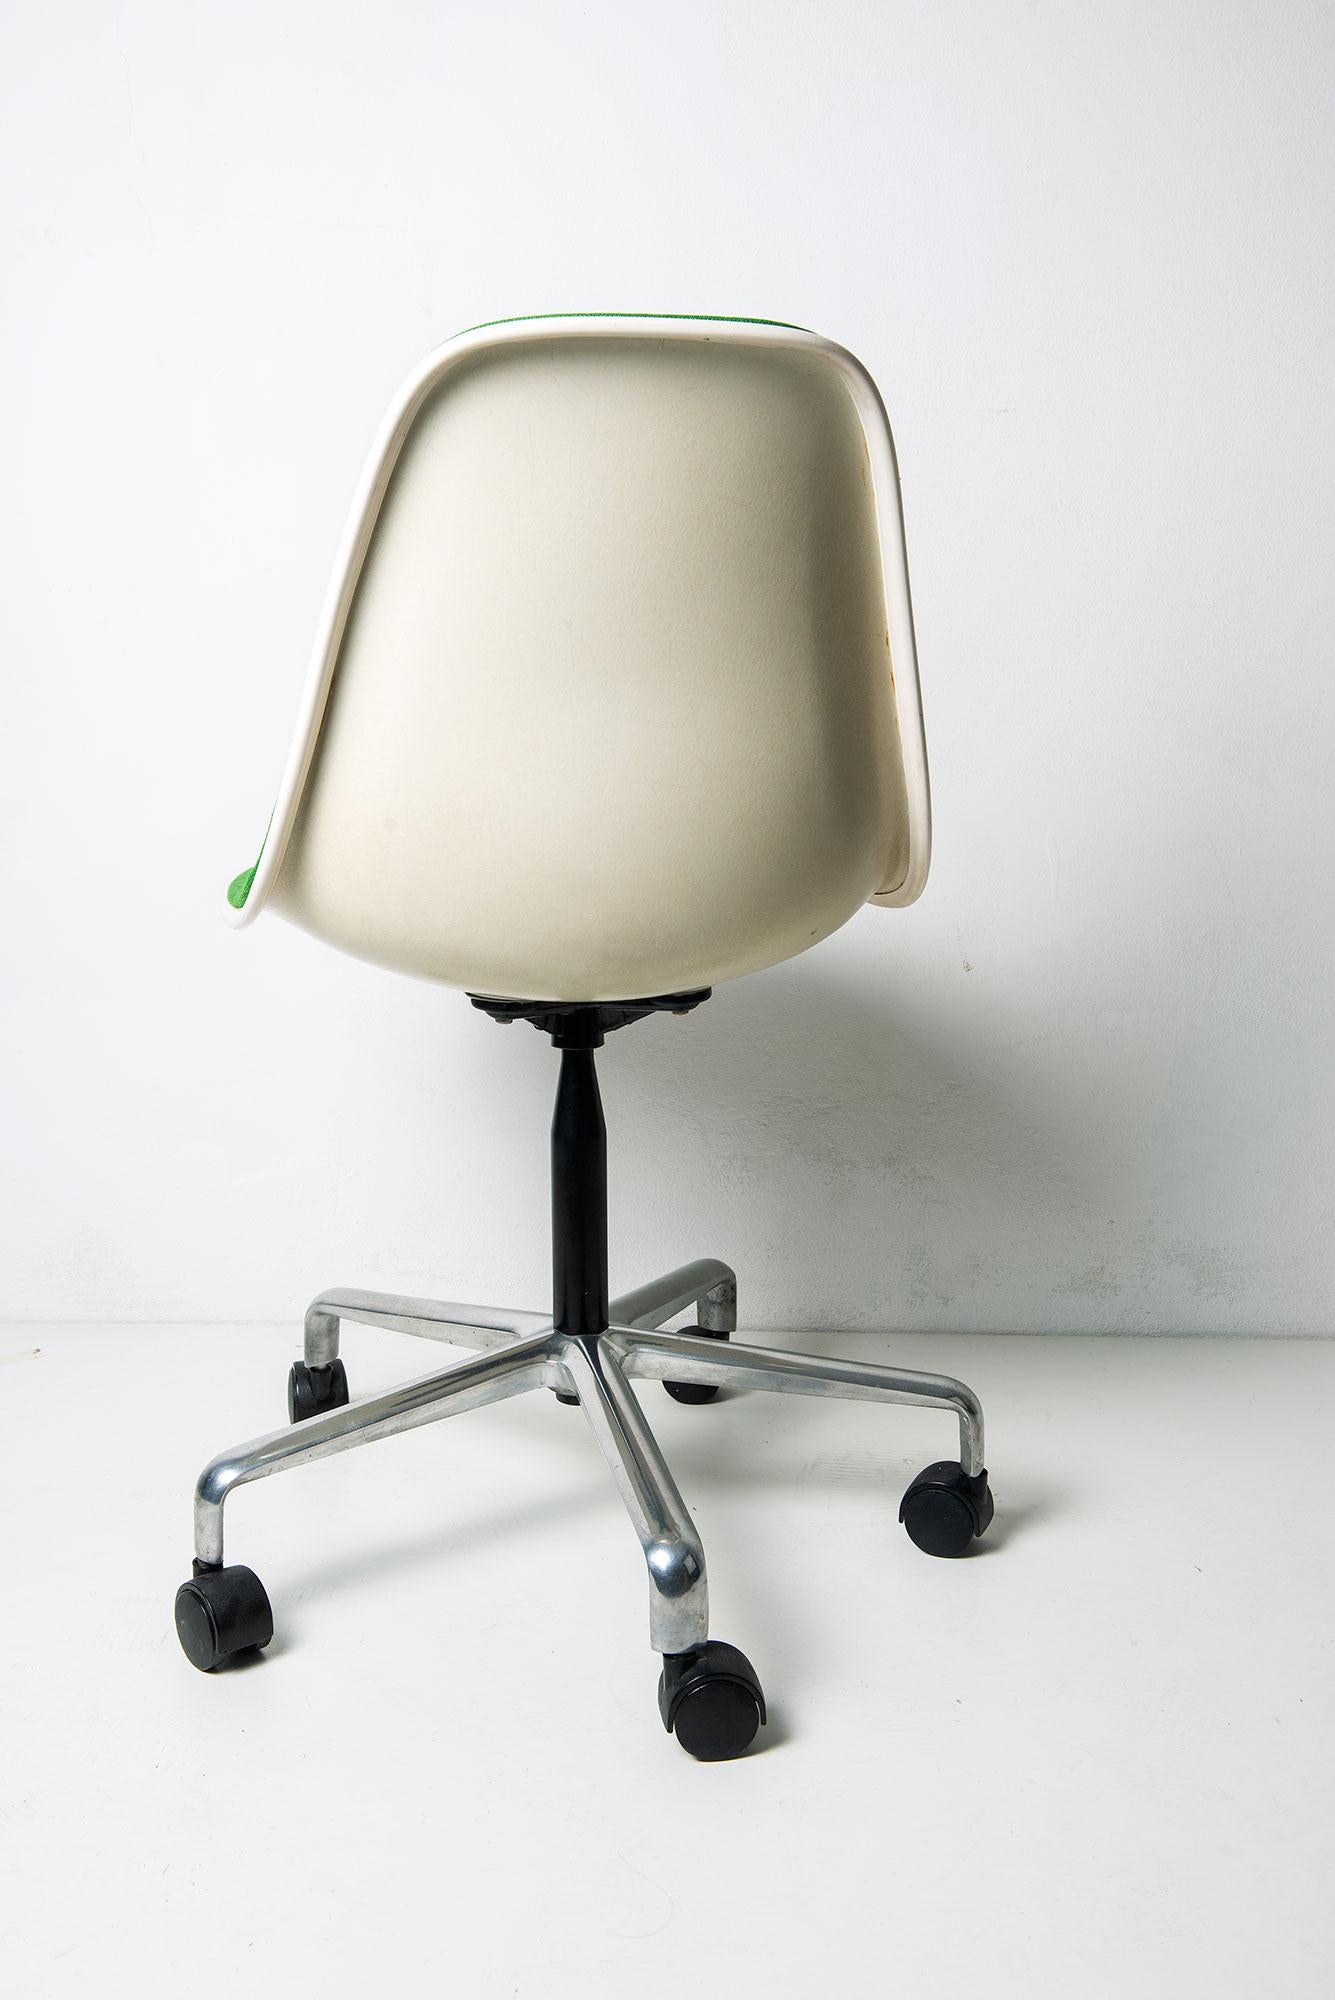 Eames Fiberglass Pscc Chair for Herman Miller, 1960s In Good Condition For Sale In Lugano, TI